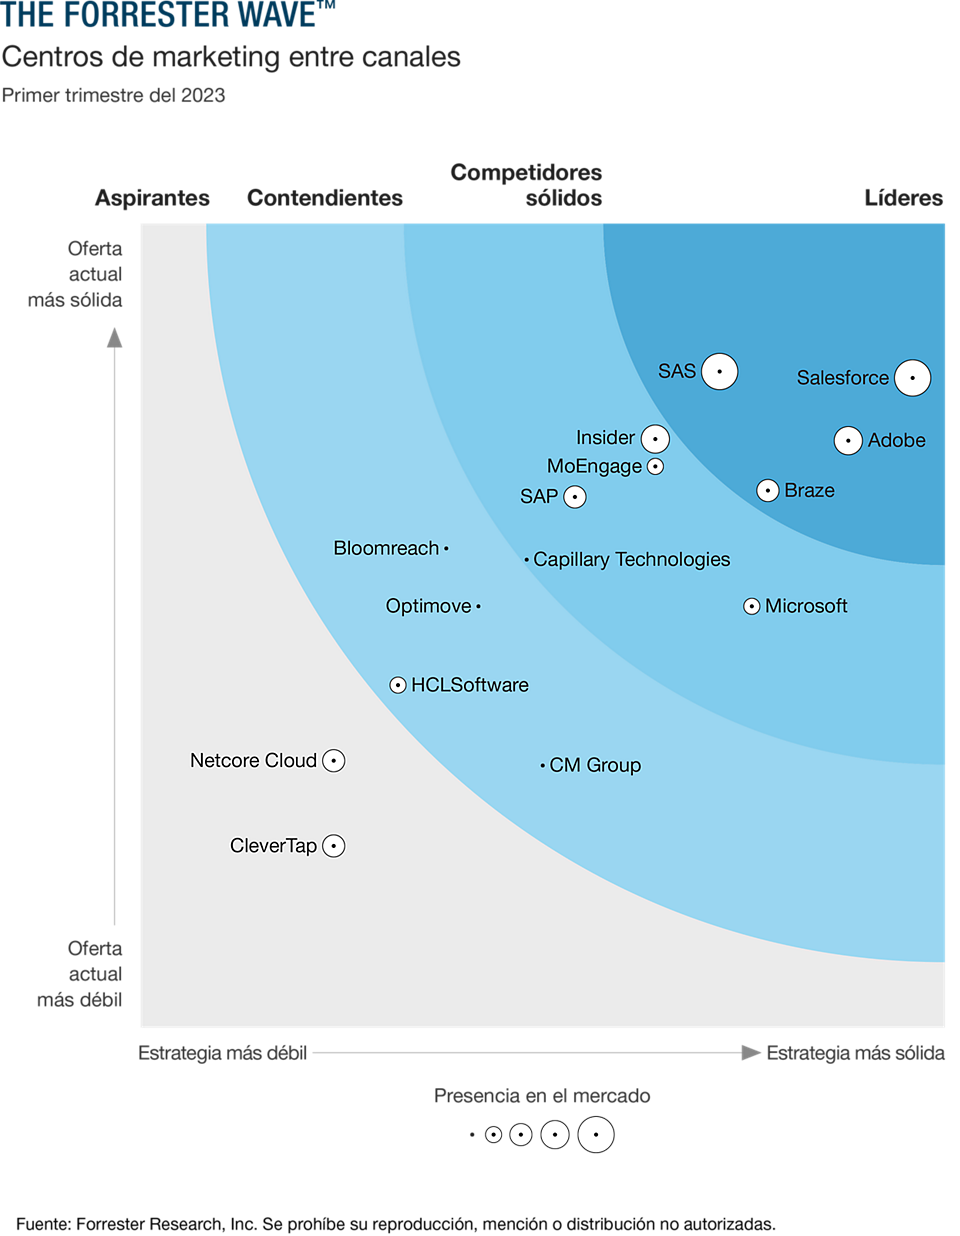 Gráfico de The Forrester Wave™: Cross-Channel Marketing Hubs, Q1 2023